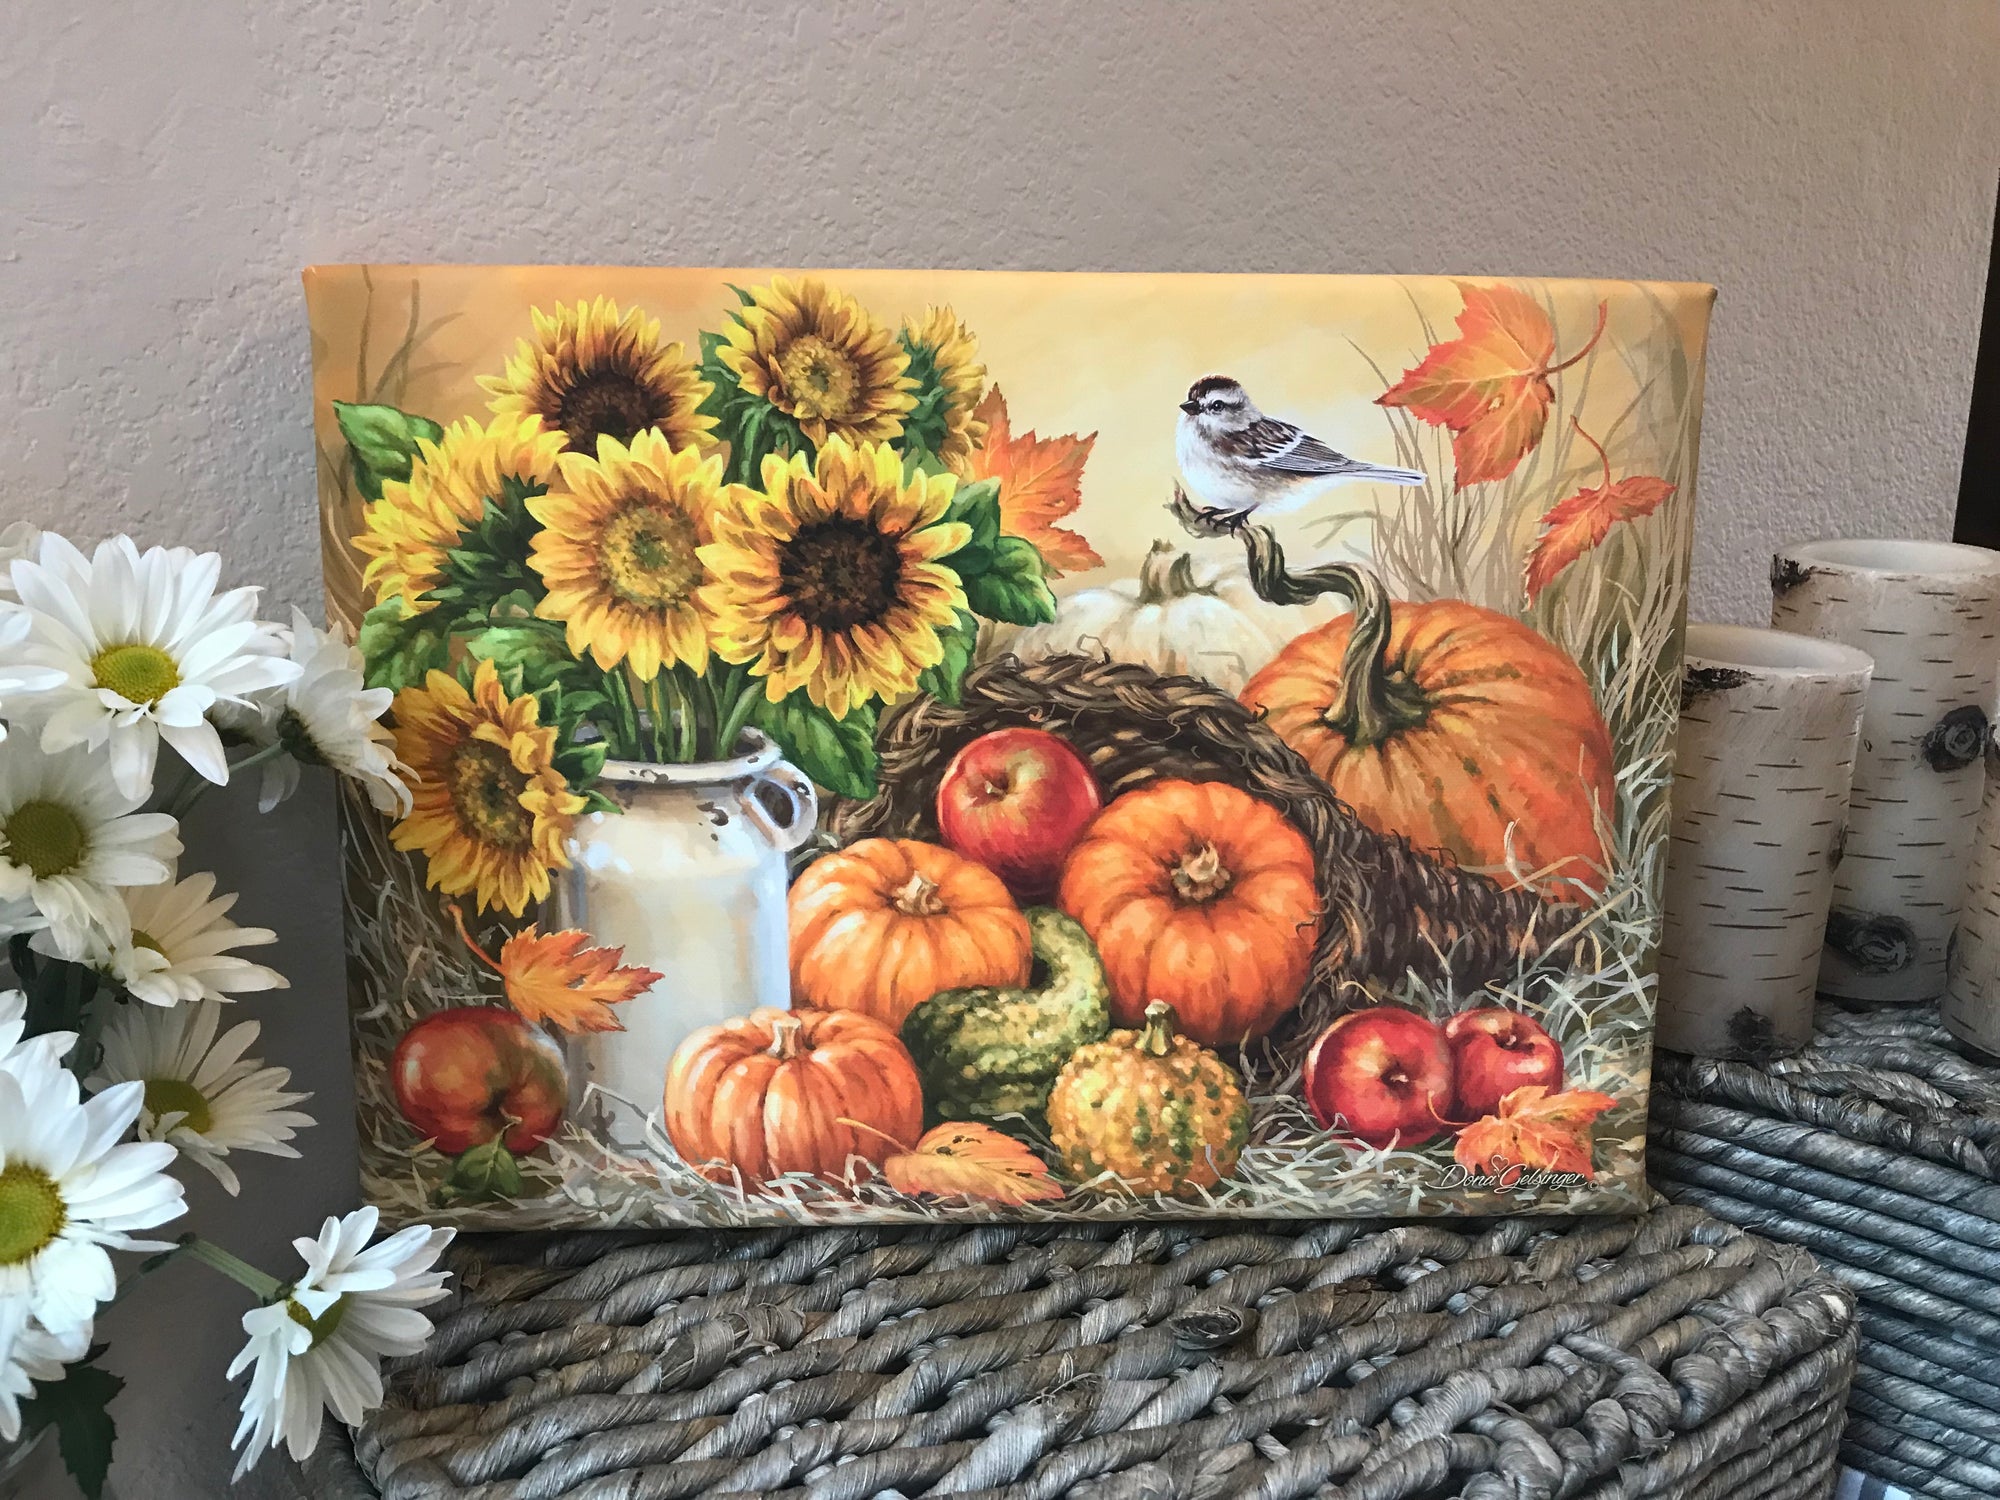 The warm hues of sunflowers sitting in an old fashioned milk jug will fill your heart with joy and nostalgia. Pumpkins, gourds, and apples surround the centerpiece, creating a wholesome and inviting atmosphere.